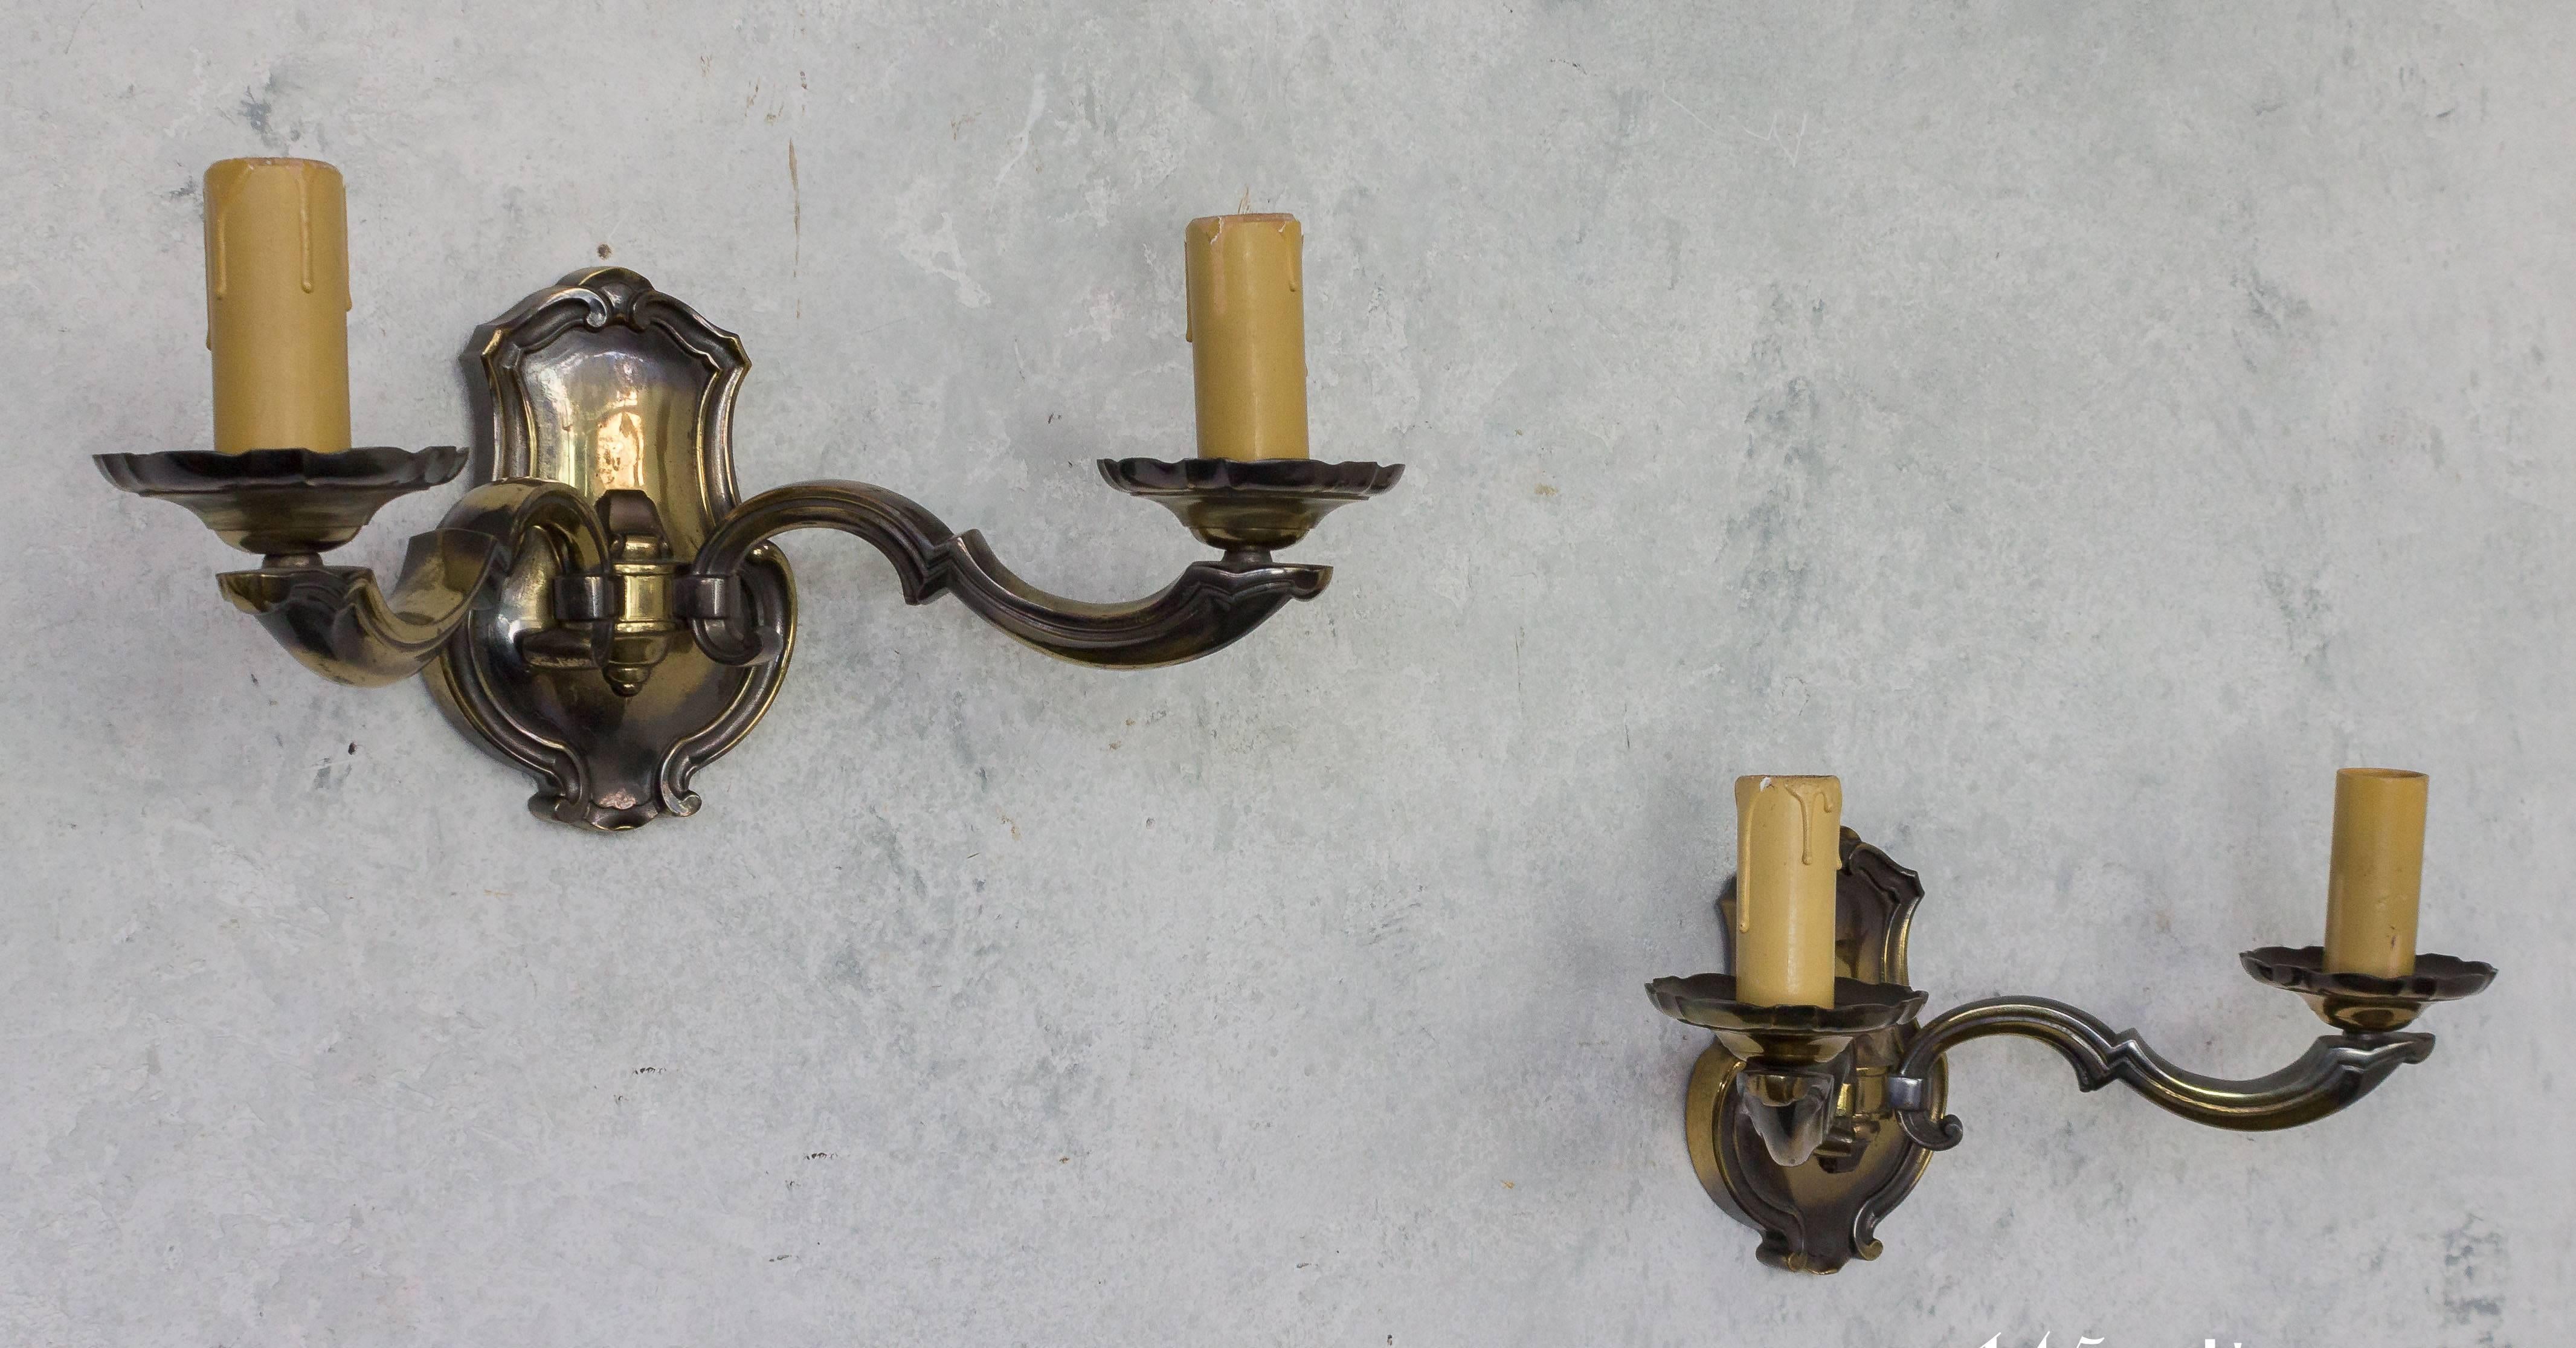 This attractive pair of French sconces, dating back to the 1940s, are made from patinated bronze, giving them a unique vintage appeal. The quality of these pieces is remarkable, and they have been well-maintained over the years, preserving their